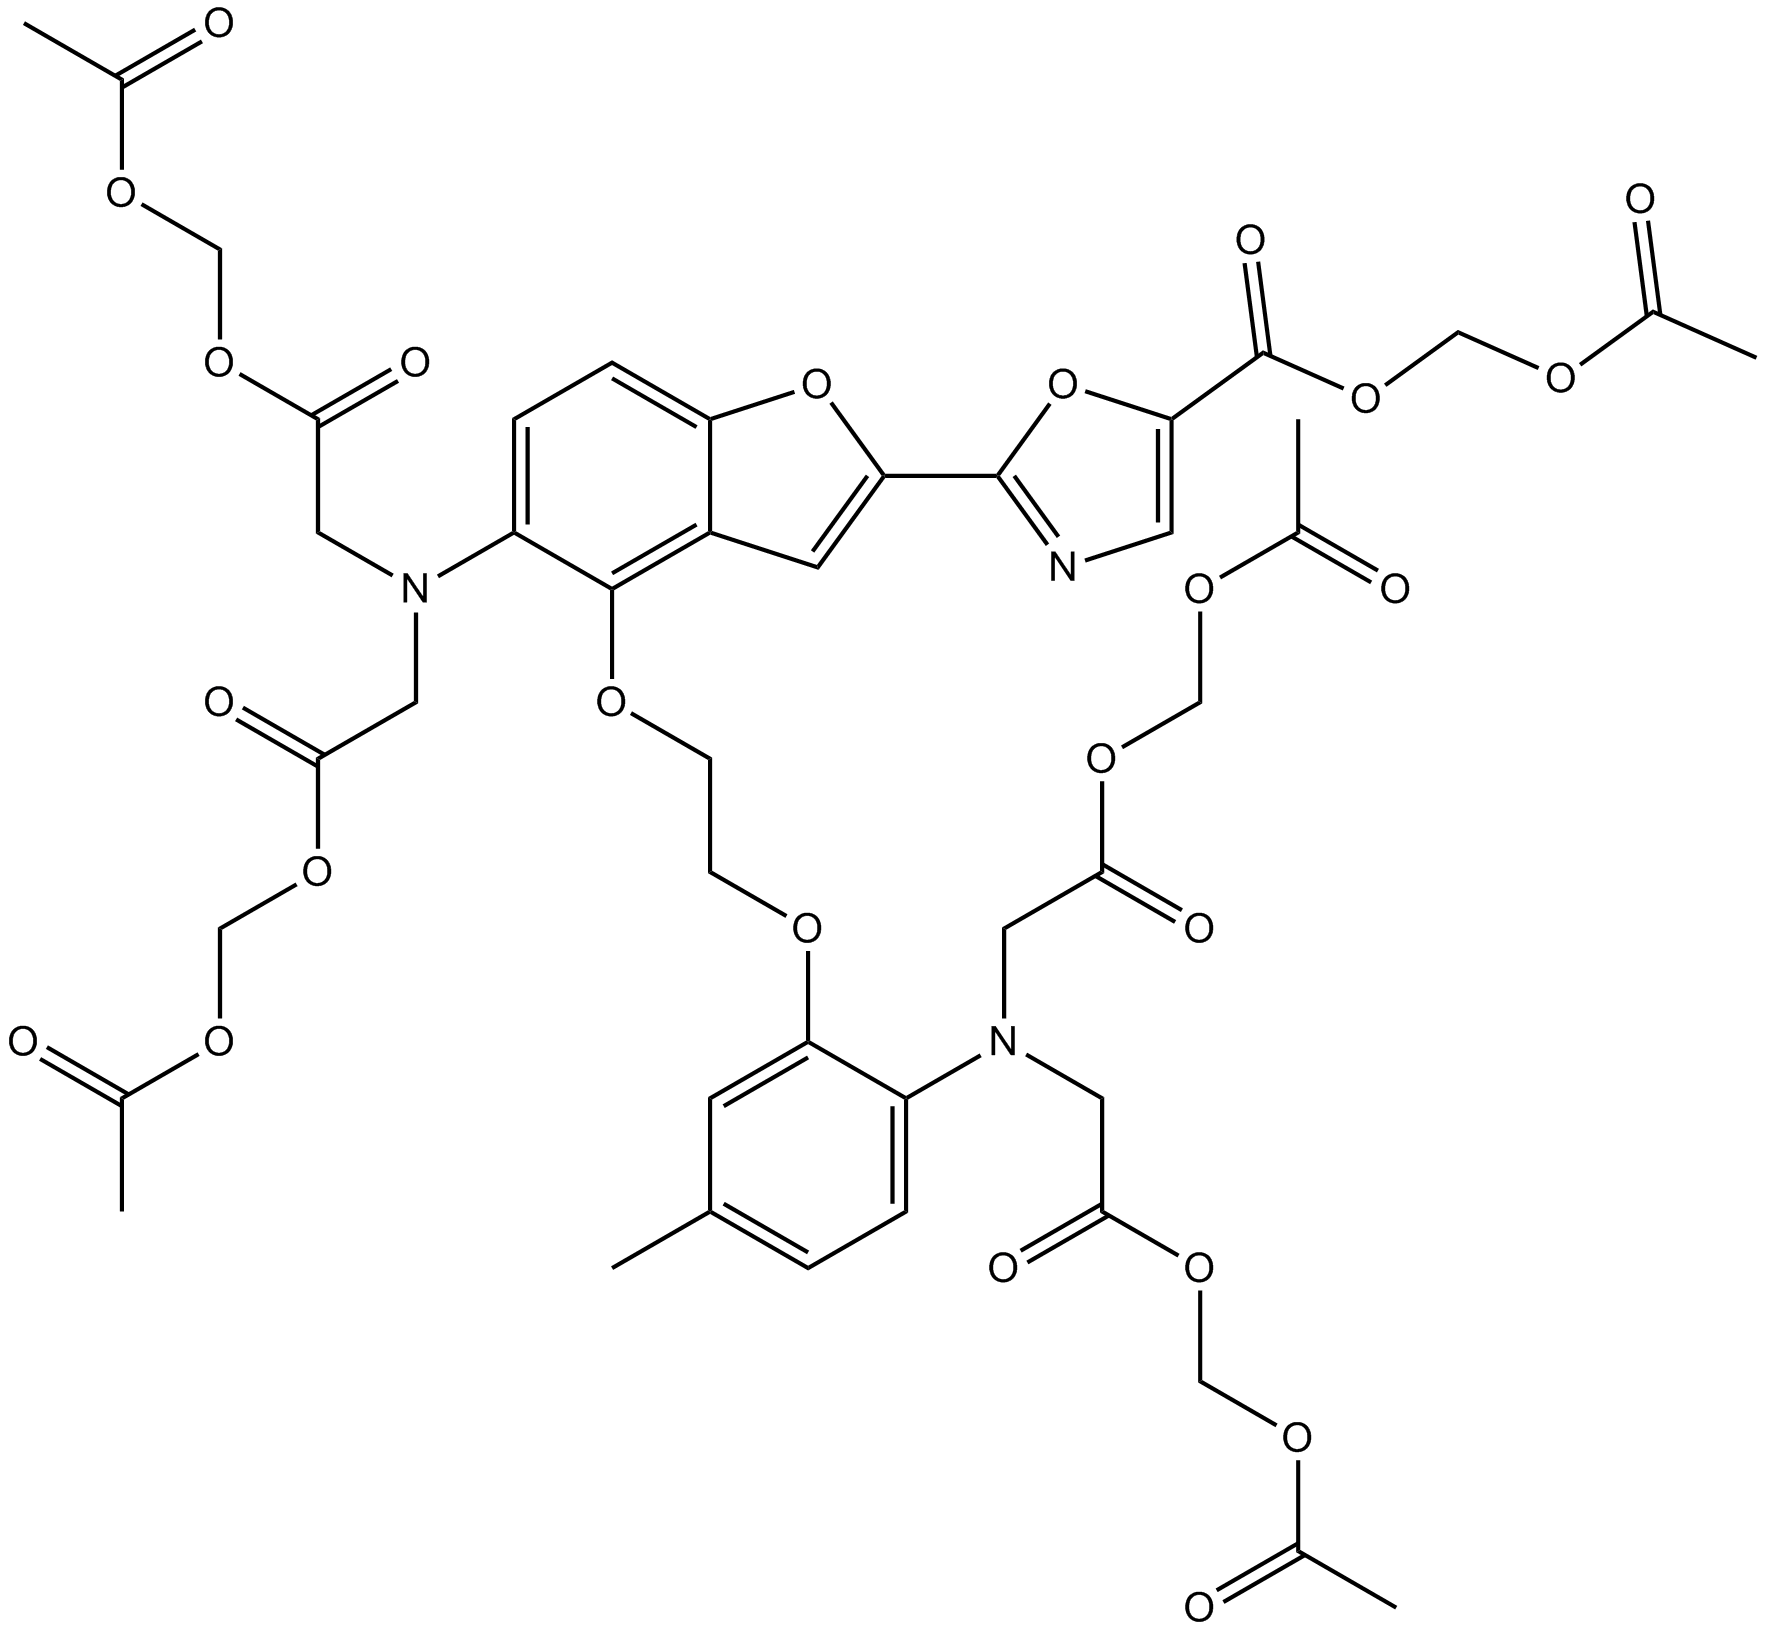 Fura-2 AM  Chemical Structure